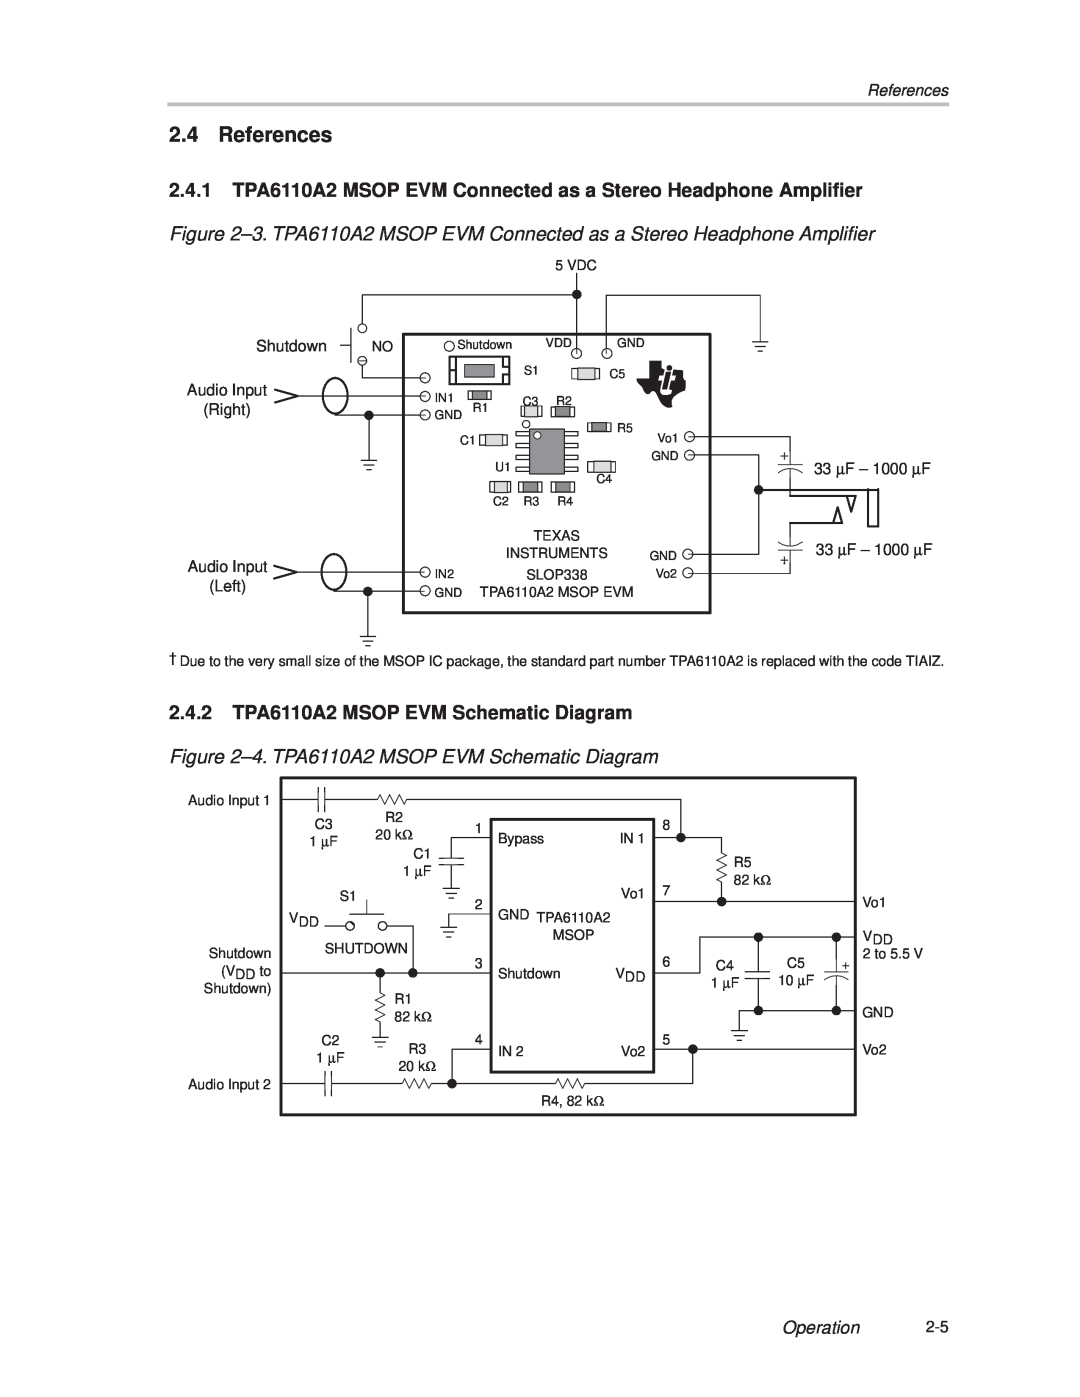 Texas Instruments manual References, 2.4.2TPA6110A2 MSOP EVM Schematic Diagram, ±4. TPA6110A2 MSOP EVM Schematic Diagram 